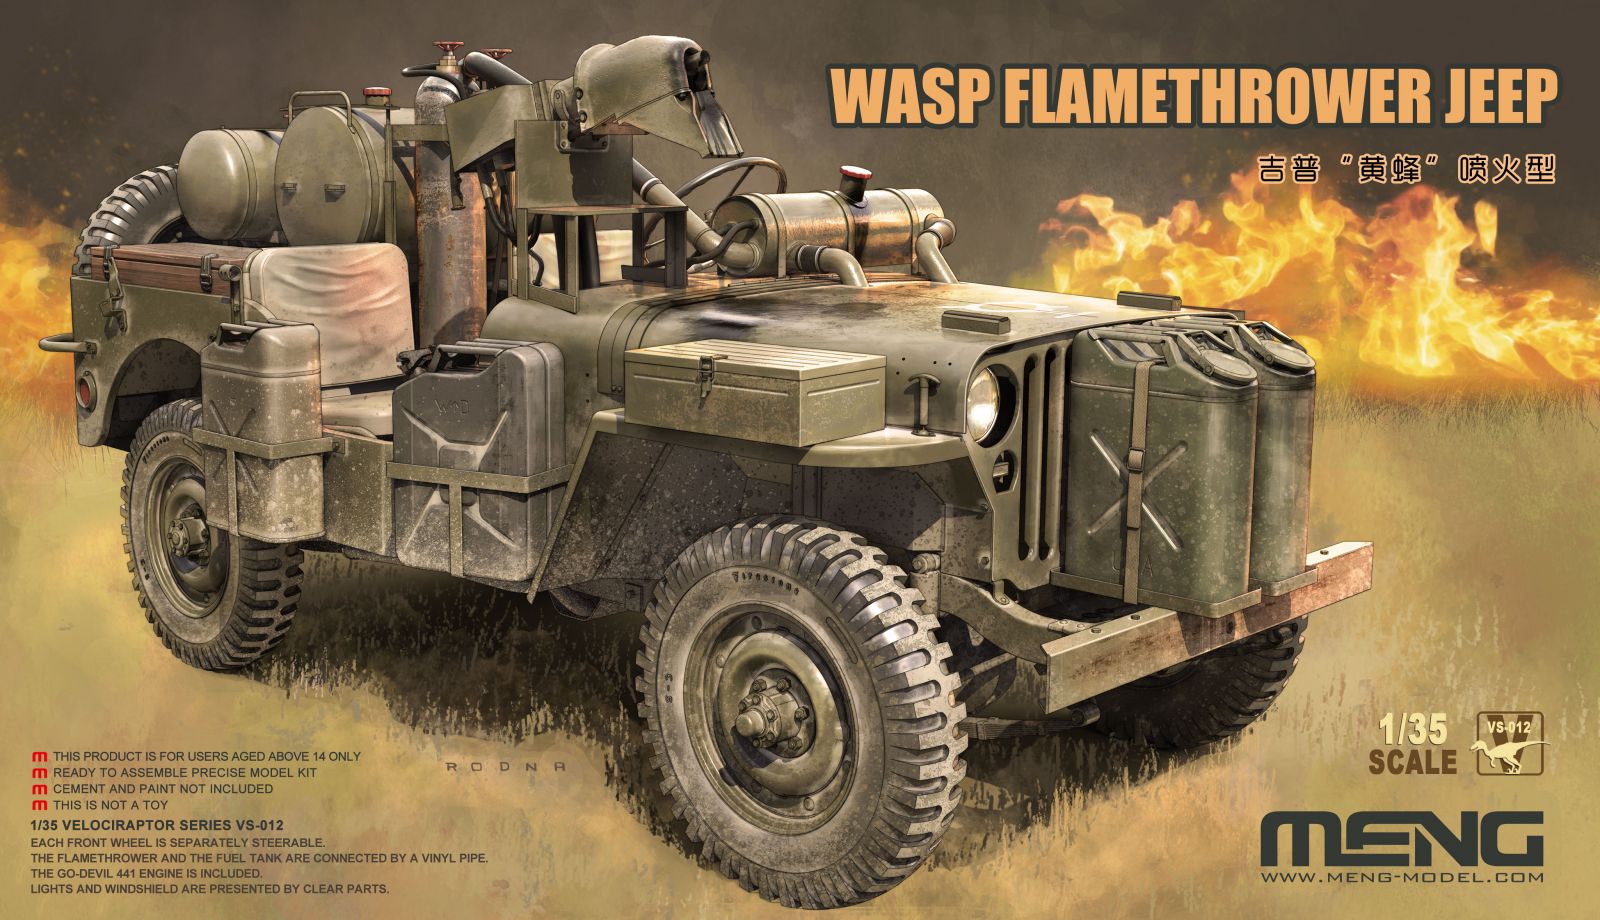 VS-012 - Meng 1/35 US Army WASP Flamethrower Jeep